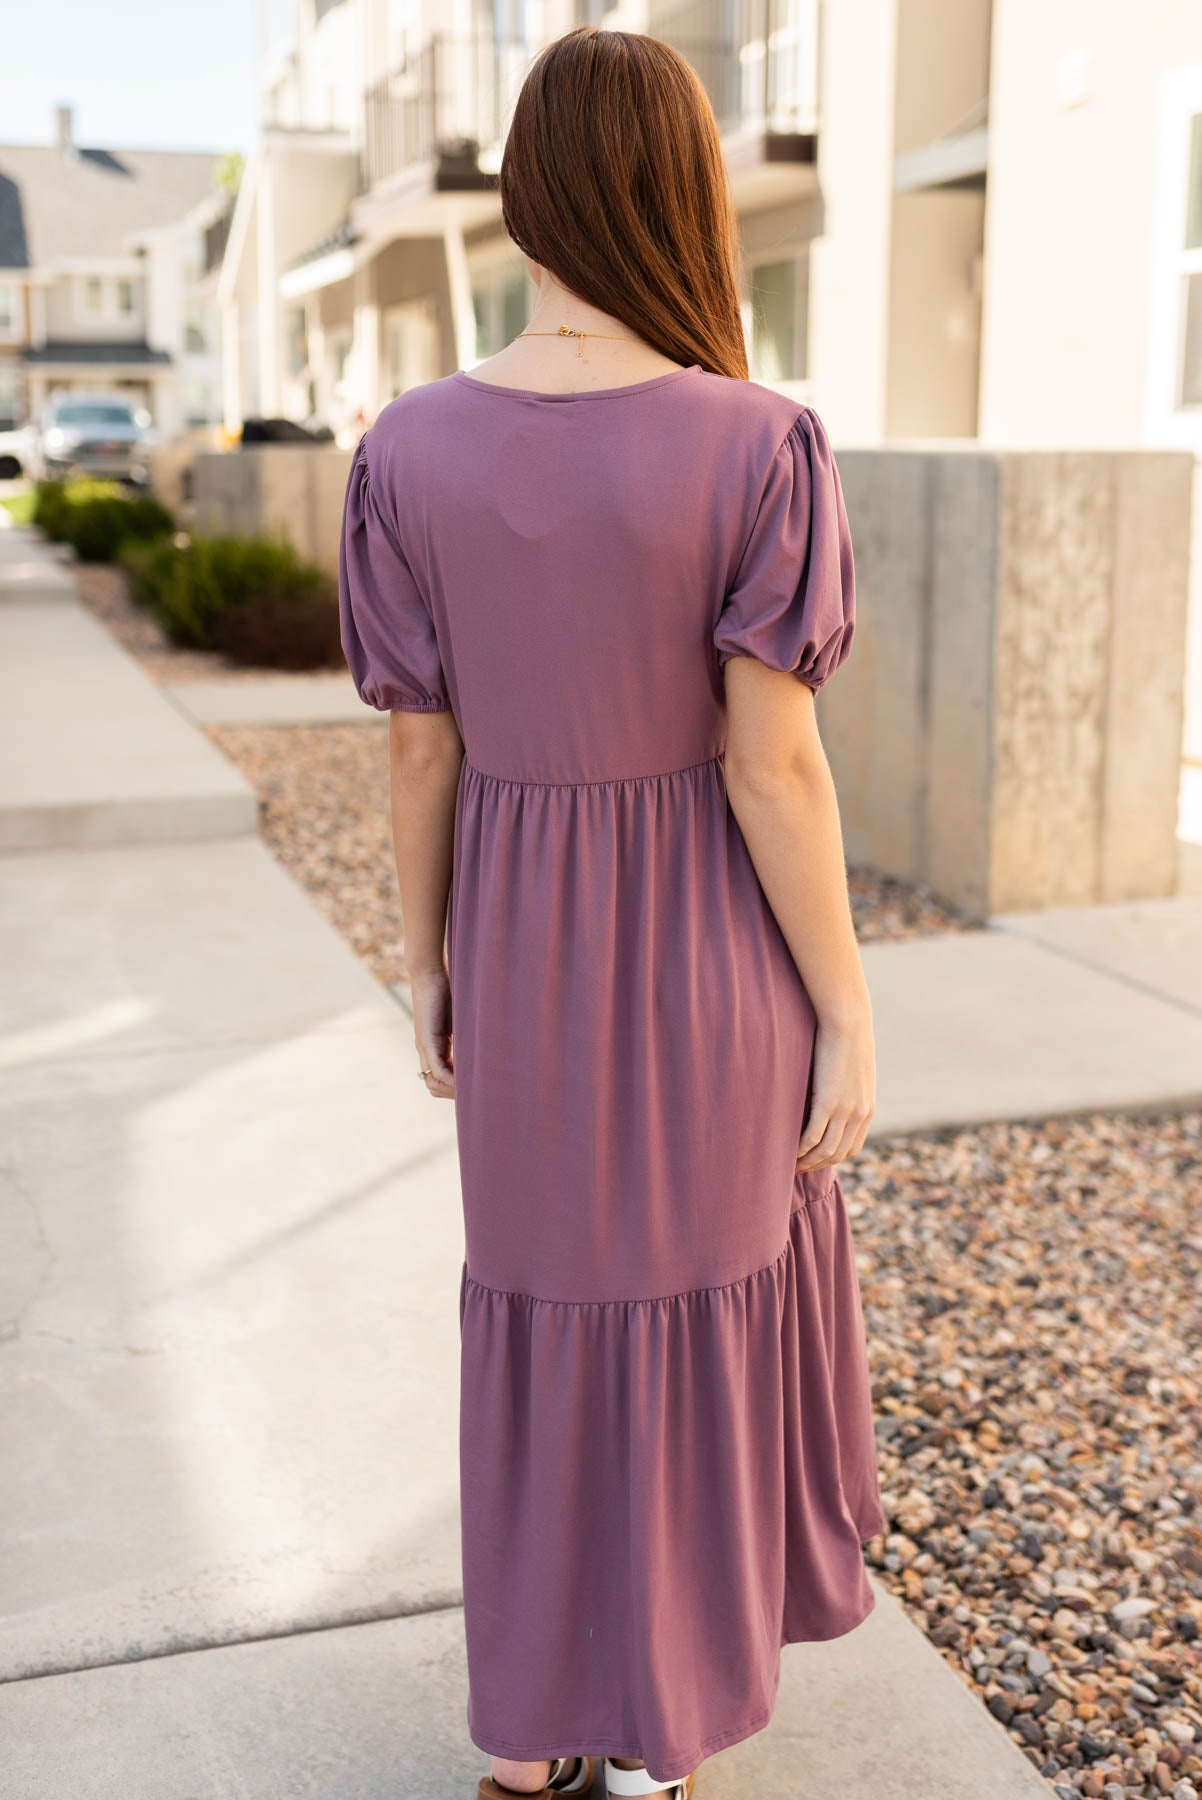 Back view of the lavender tiered dress